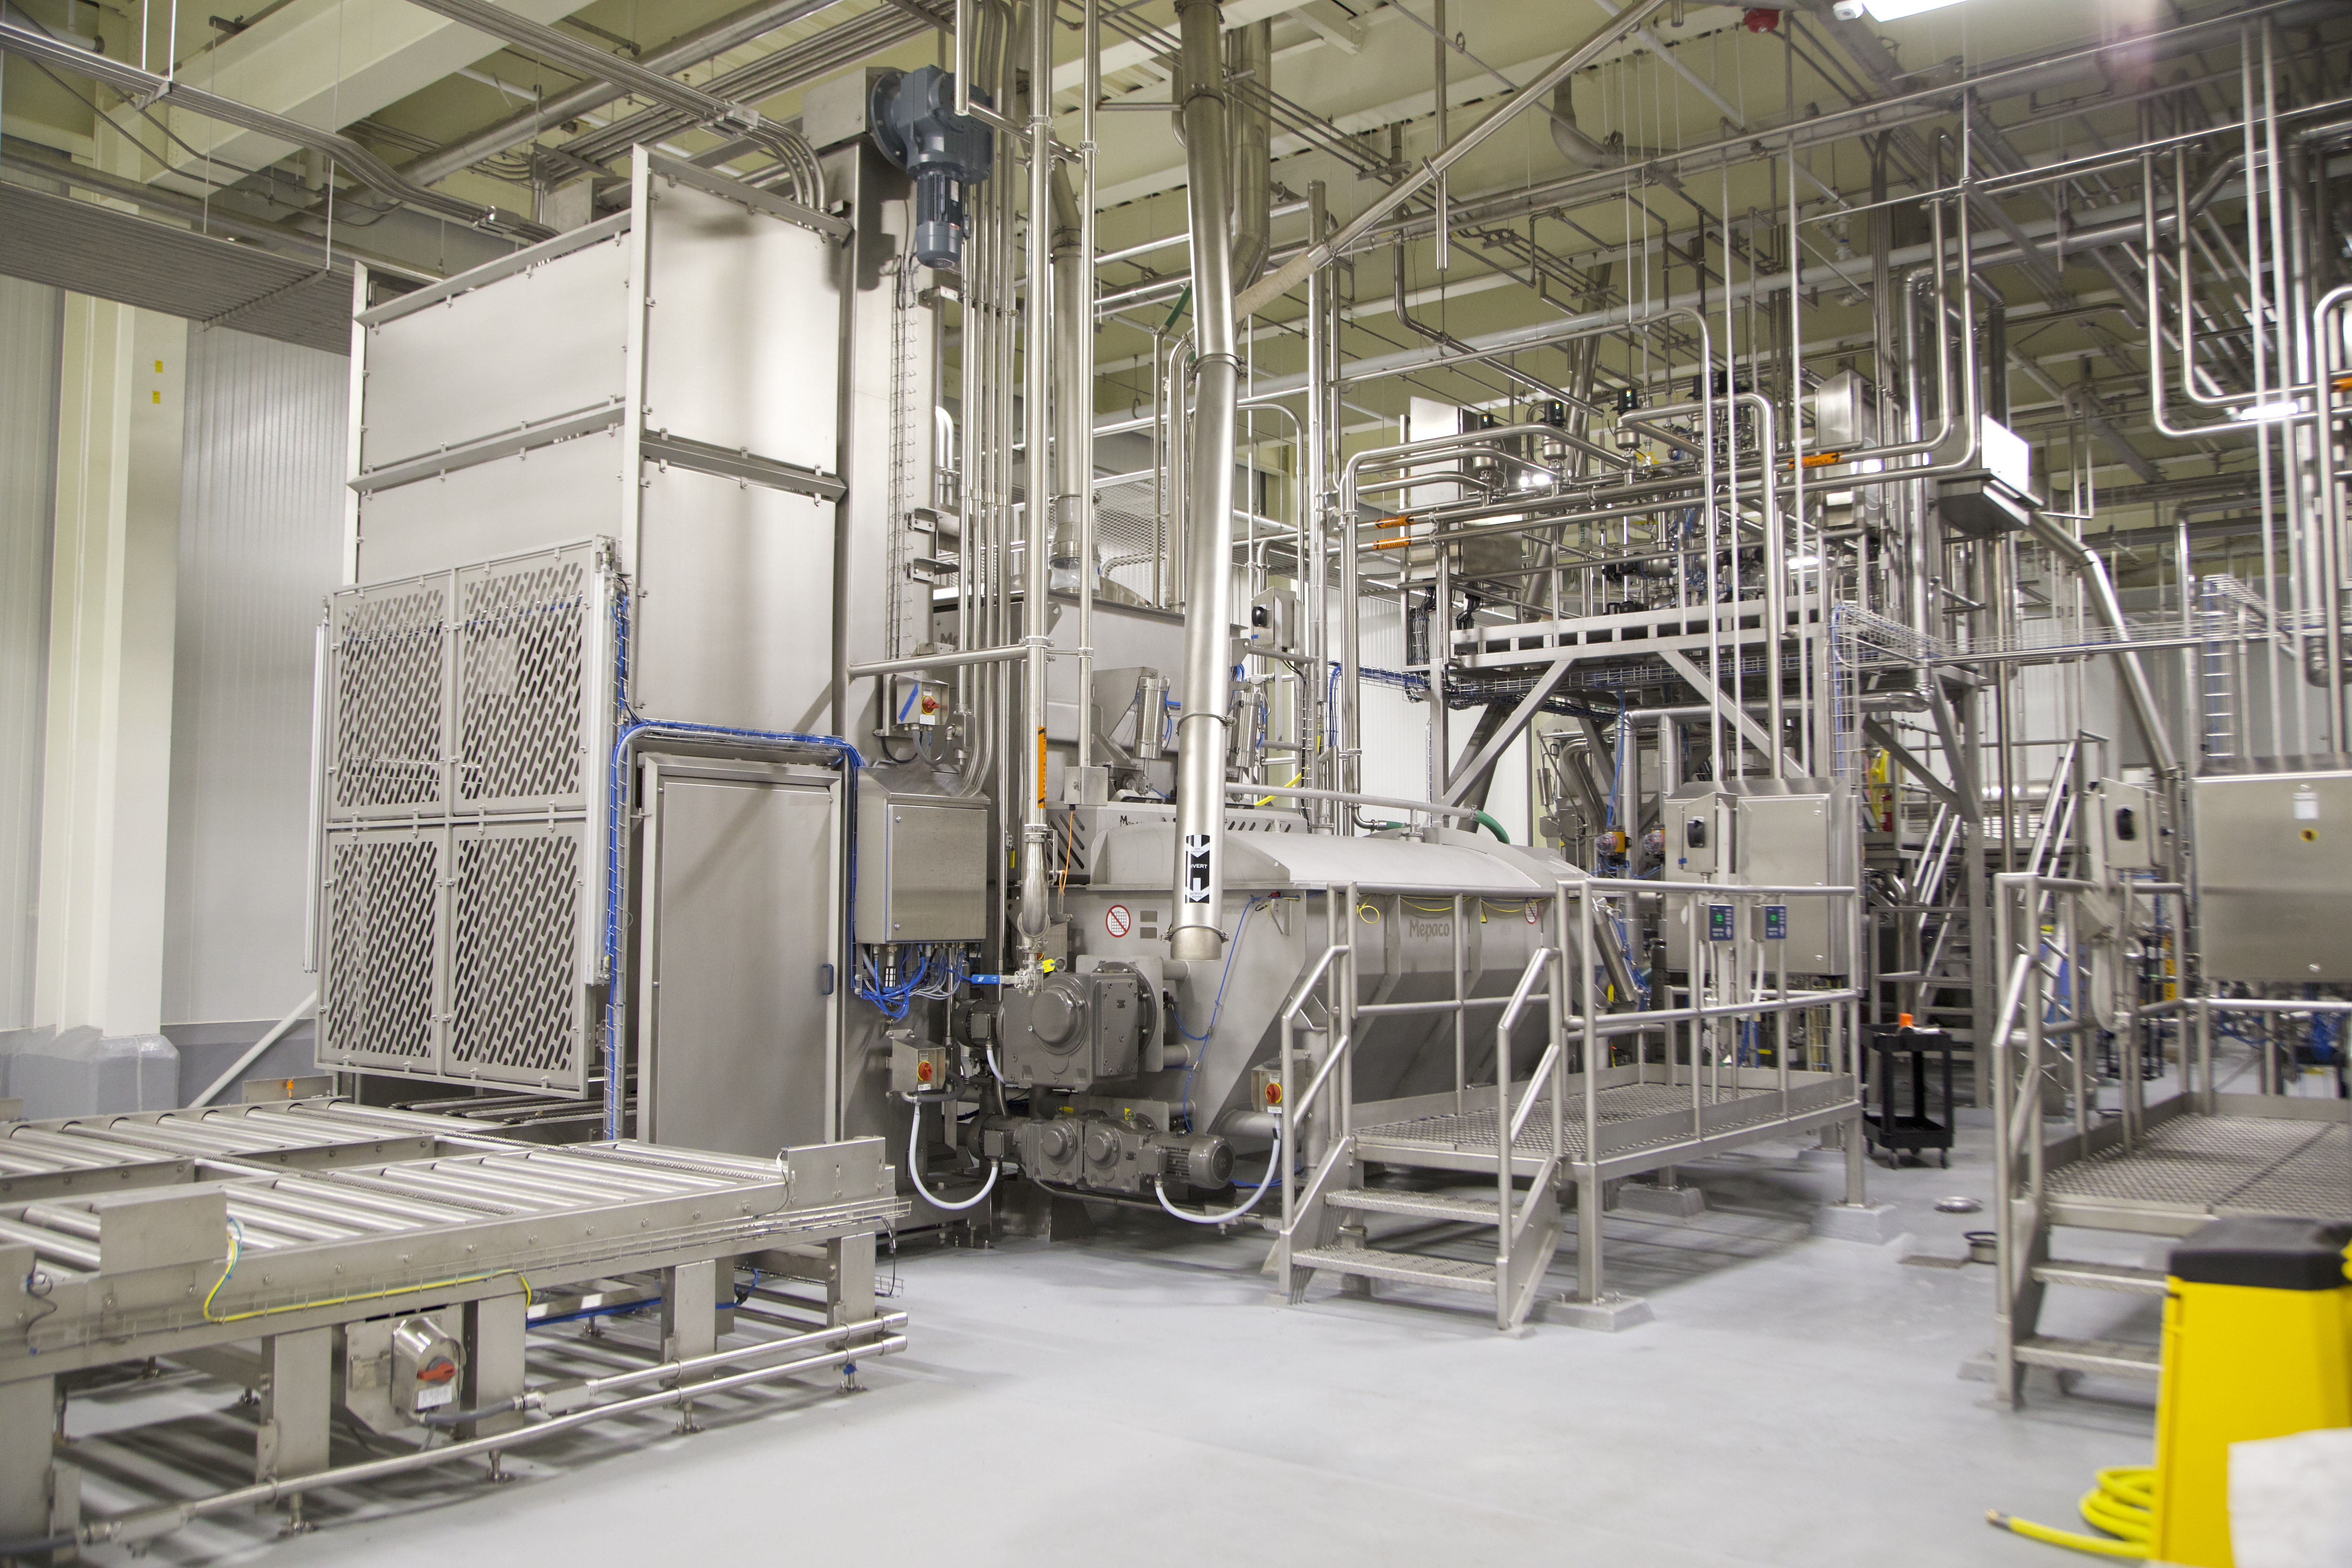 Hill's Pet Nutrition's new facility spans 365,000 square feet and features several automated advancements